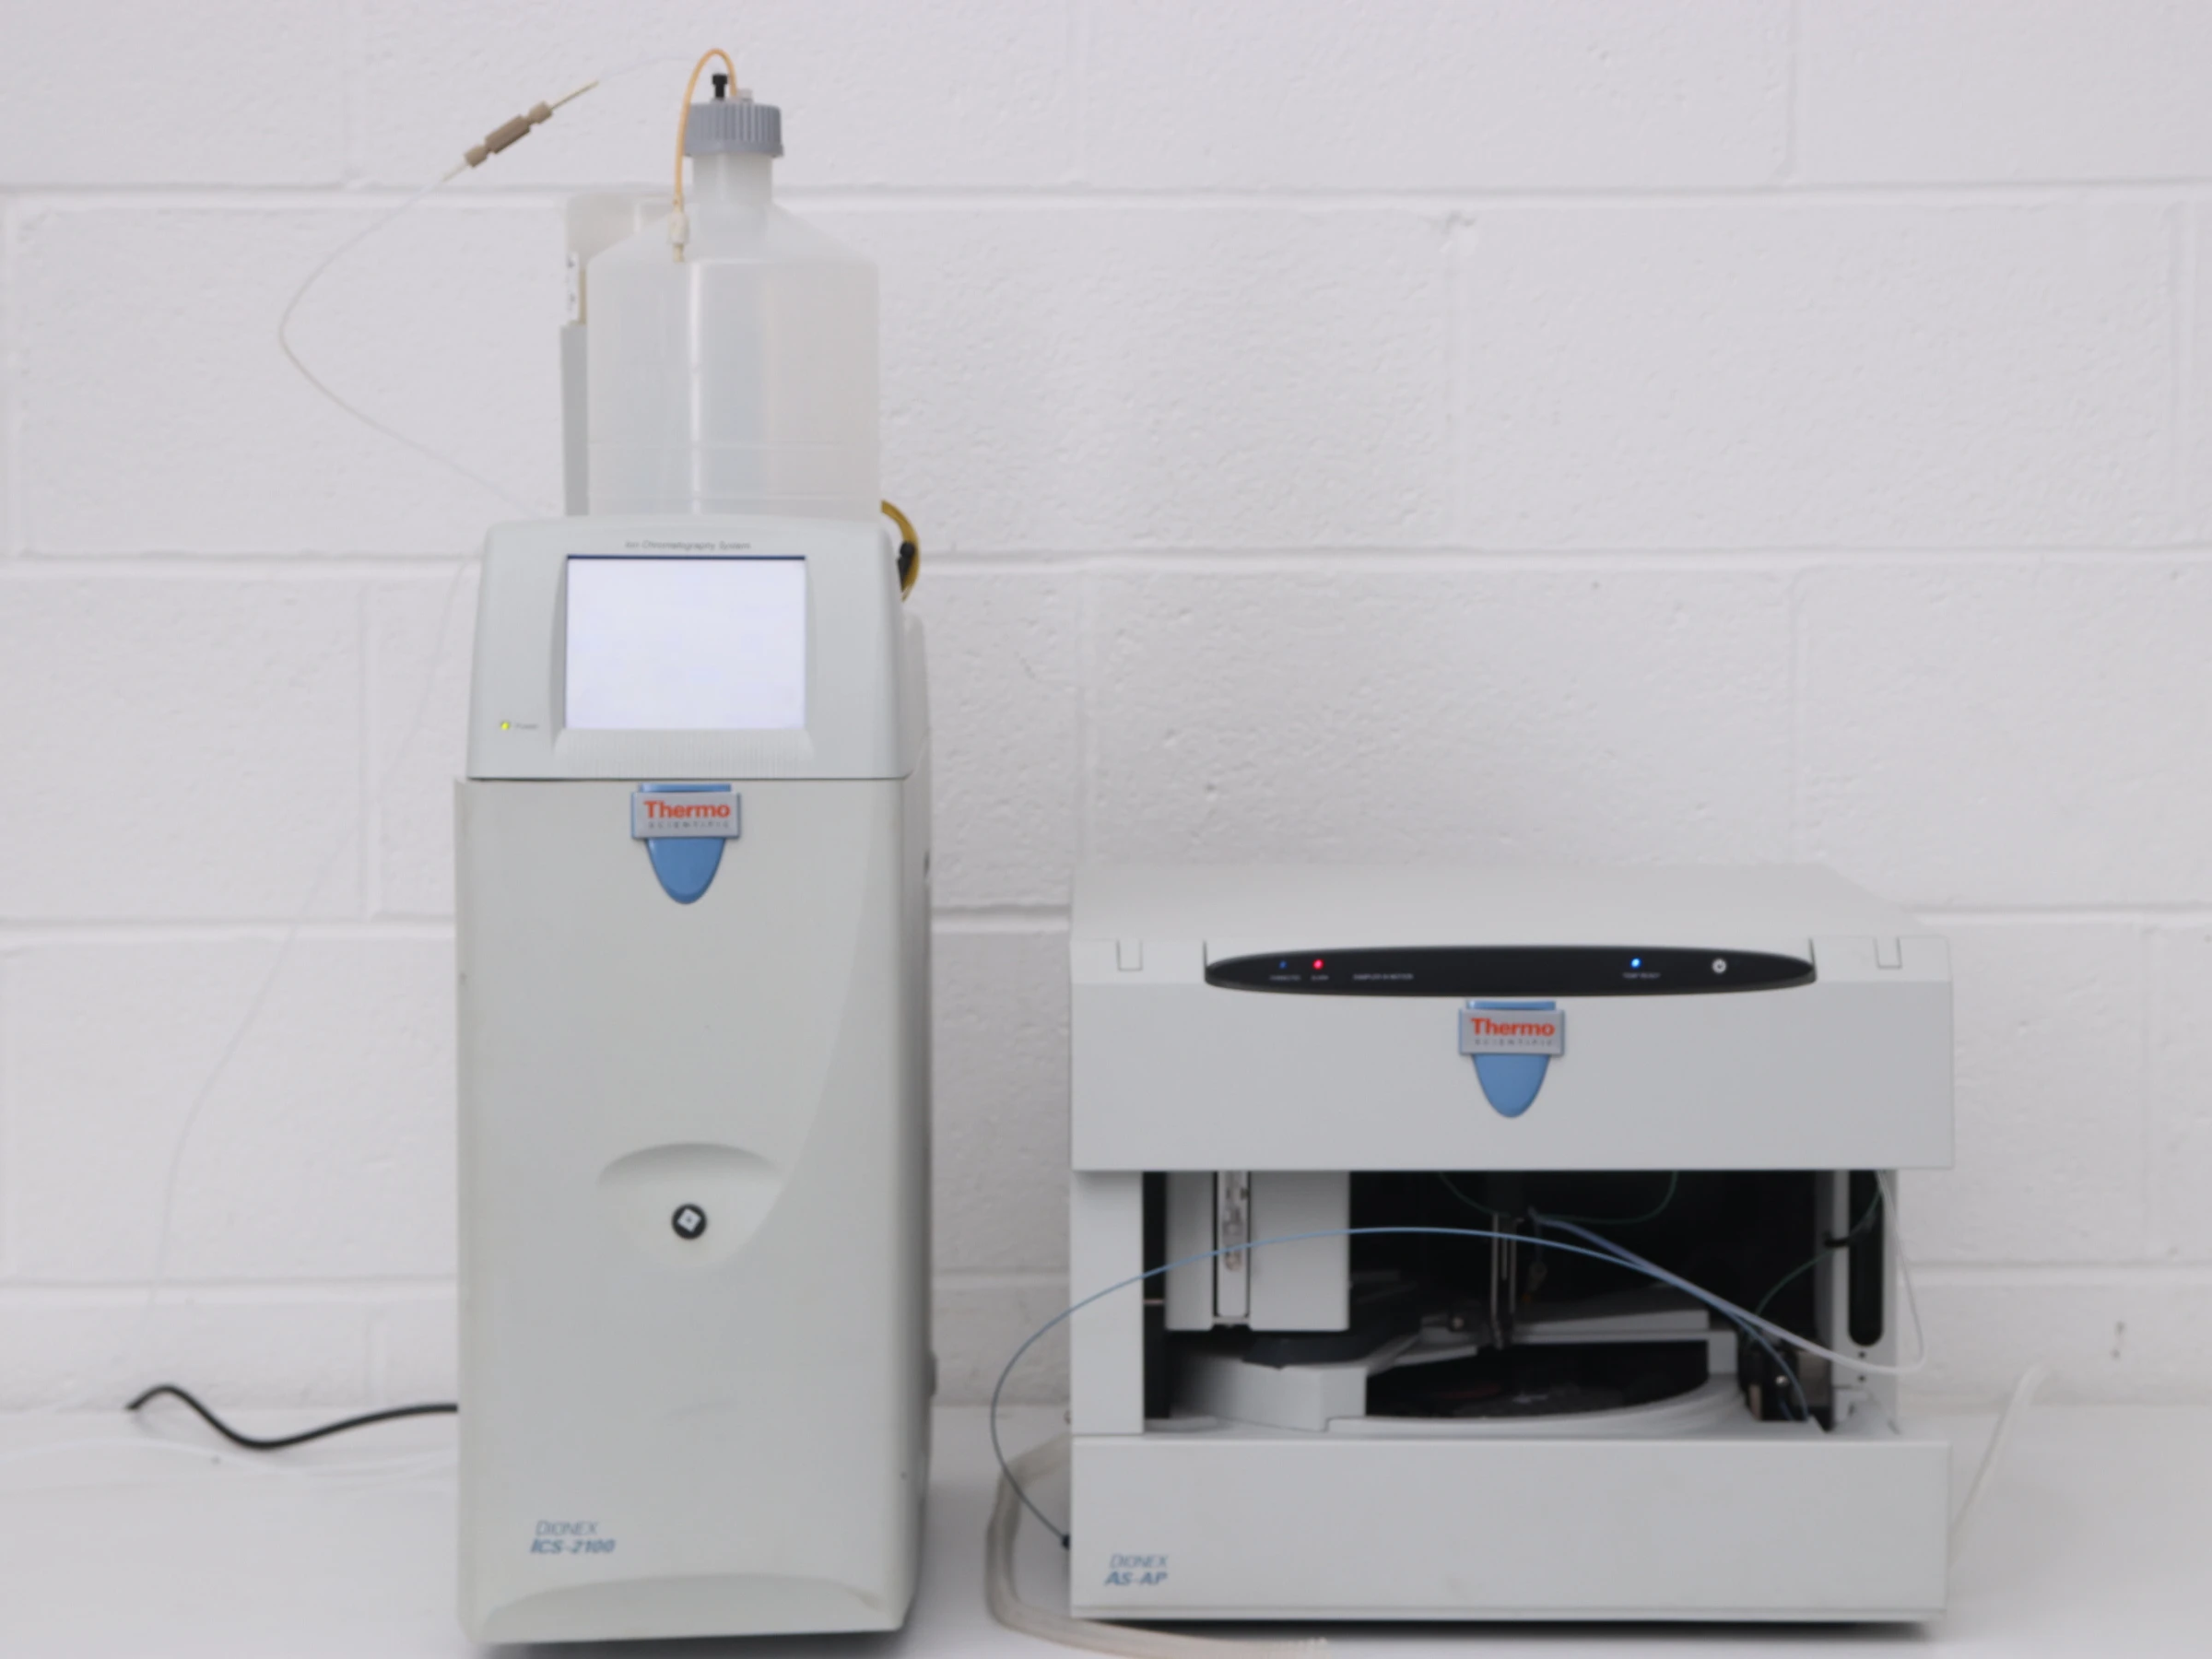 Thermo Dionex ICS-2100 Ion Chromatography System with AS-AP